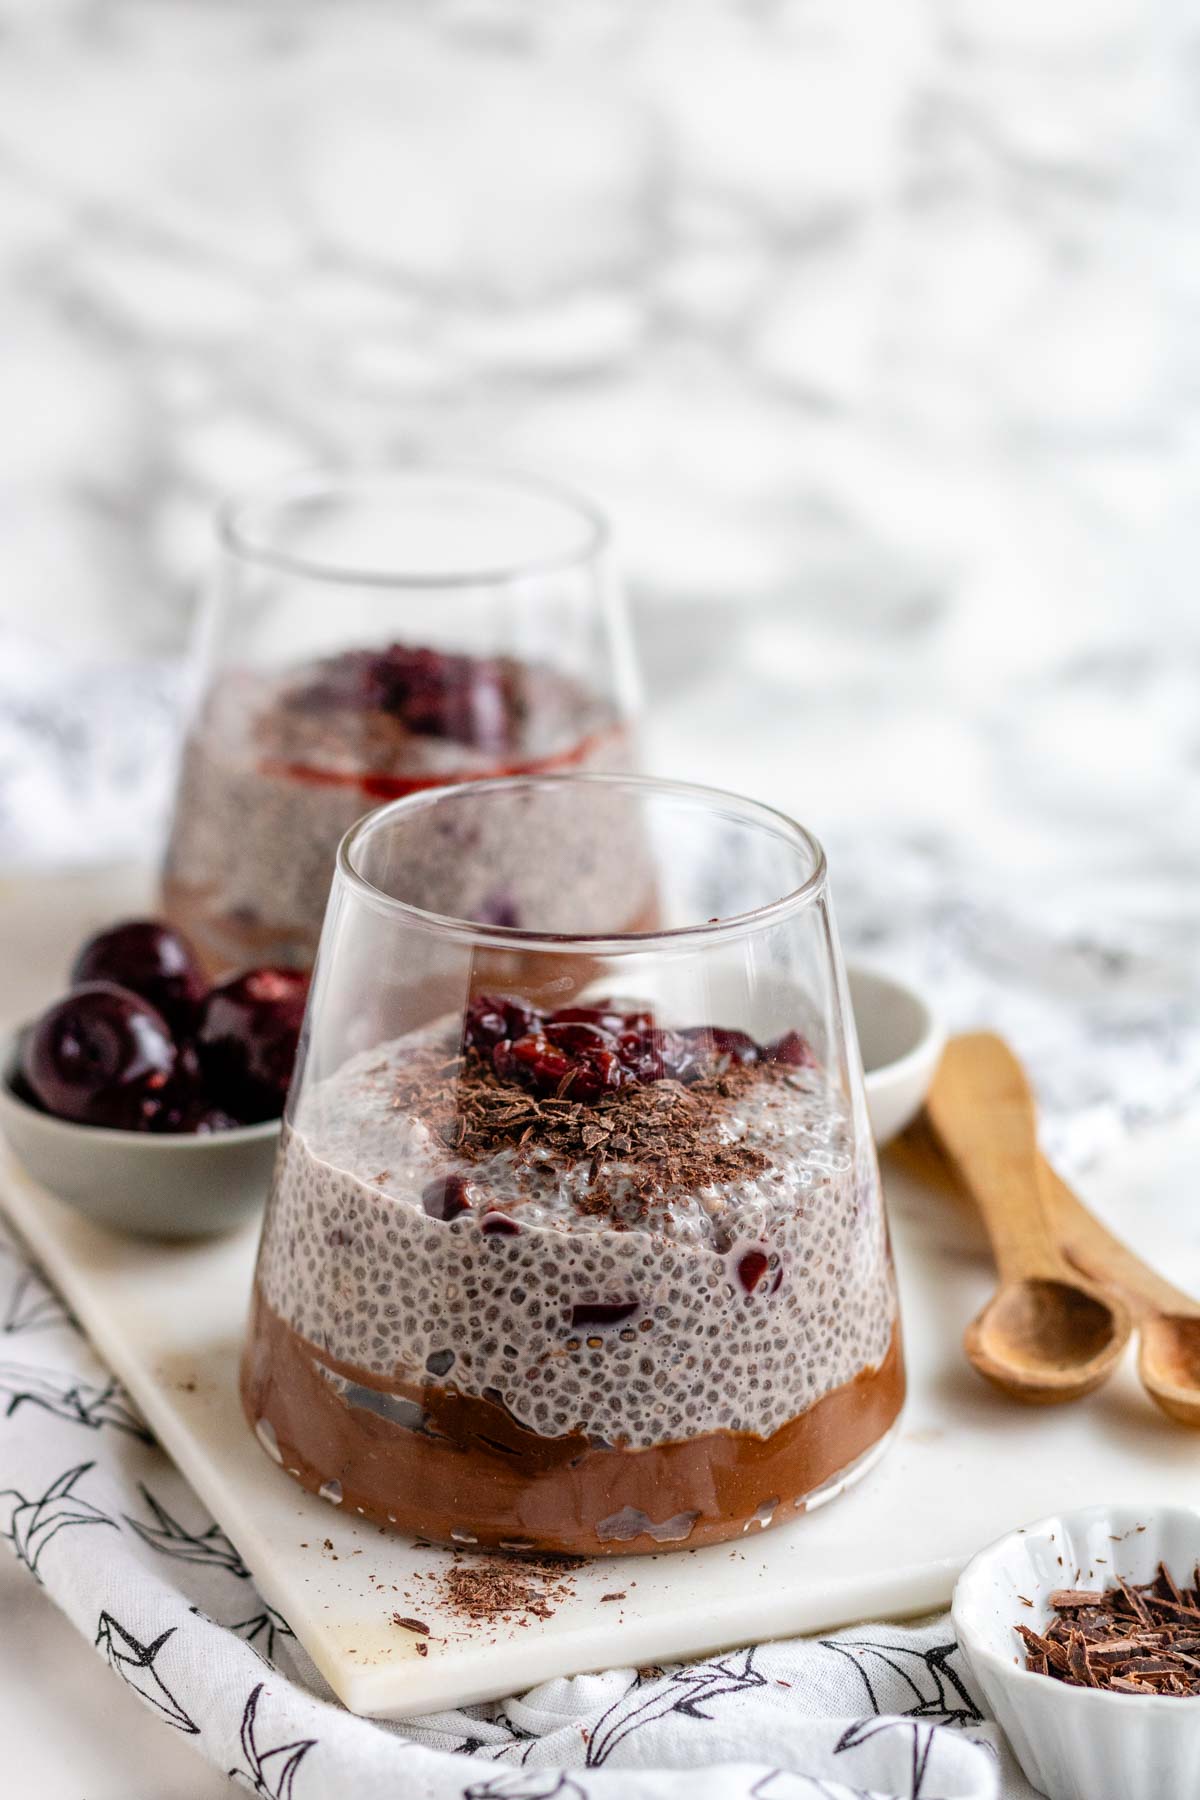 A glass with chocolate pudding on the bottom topped with chia pudding, cherries, and chocolate shavings.